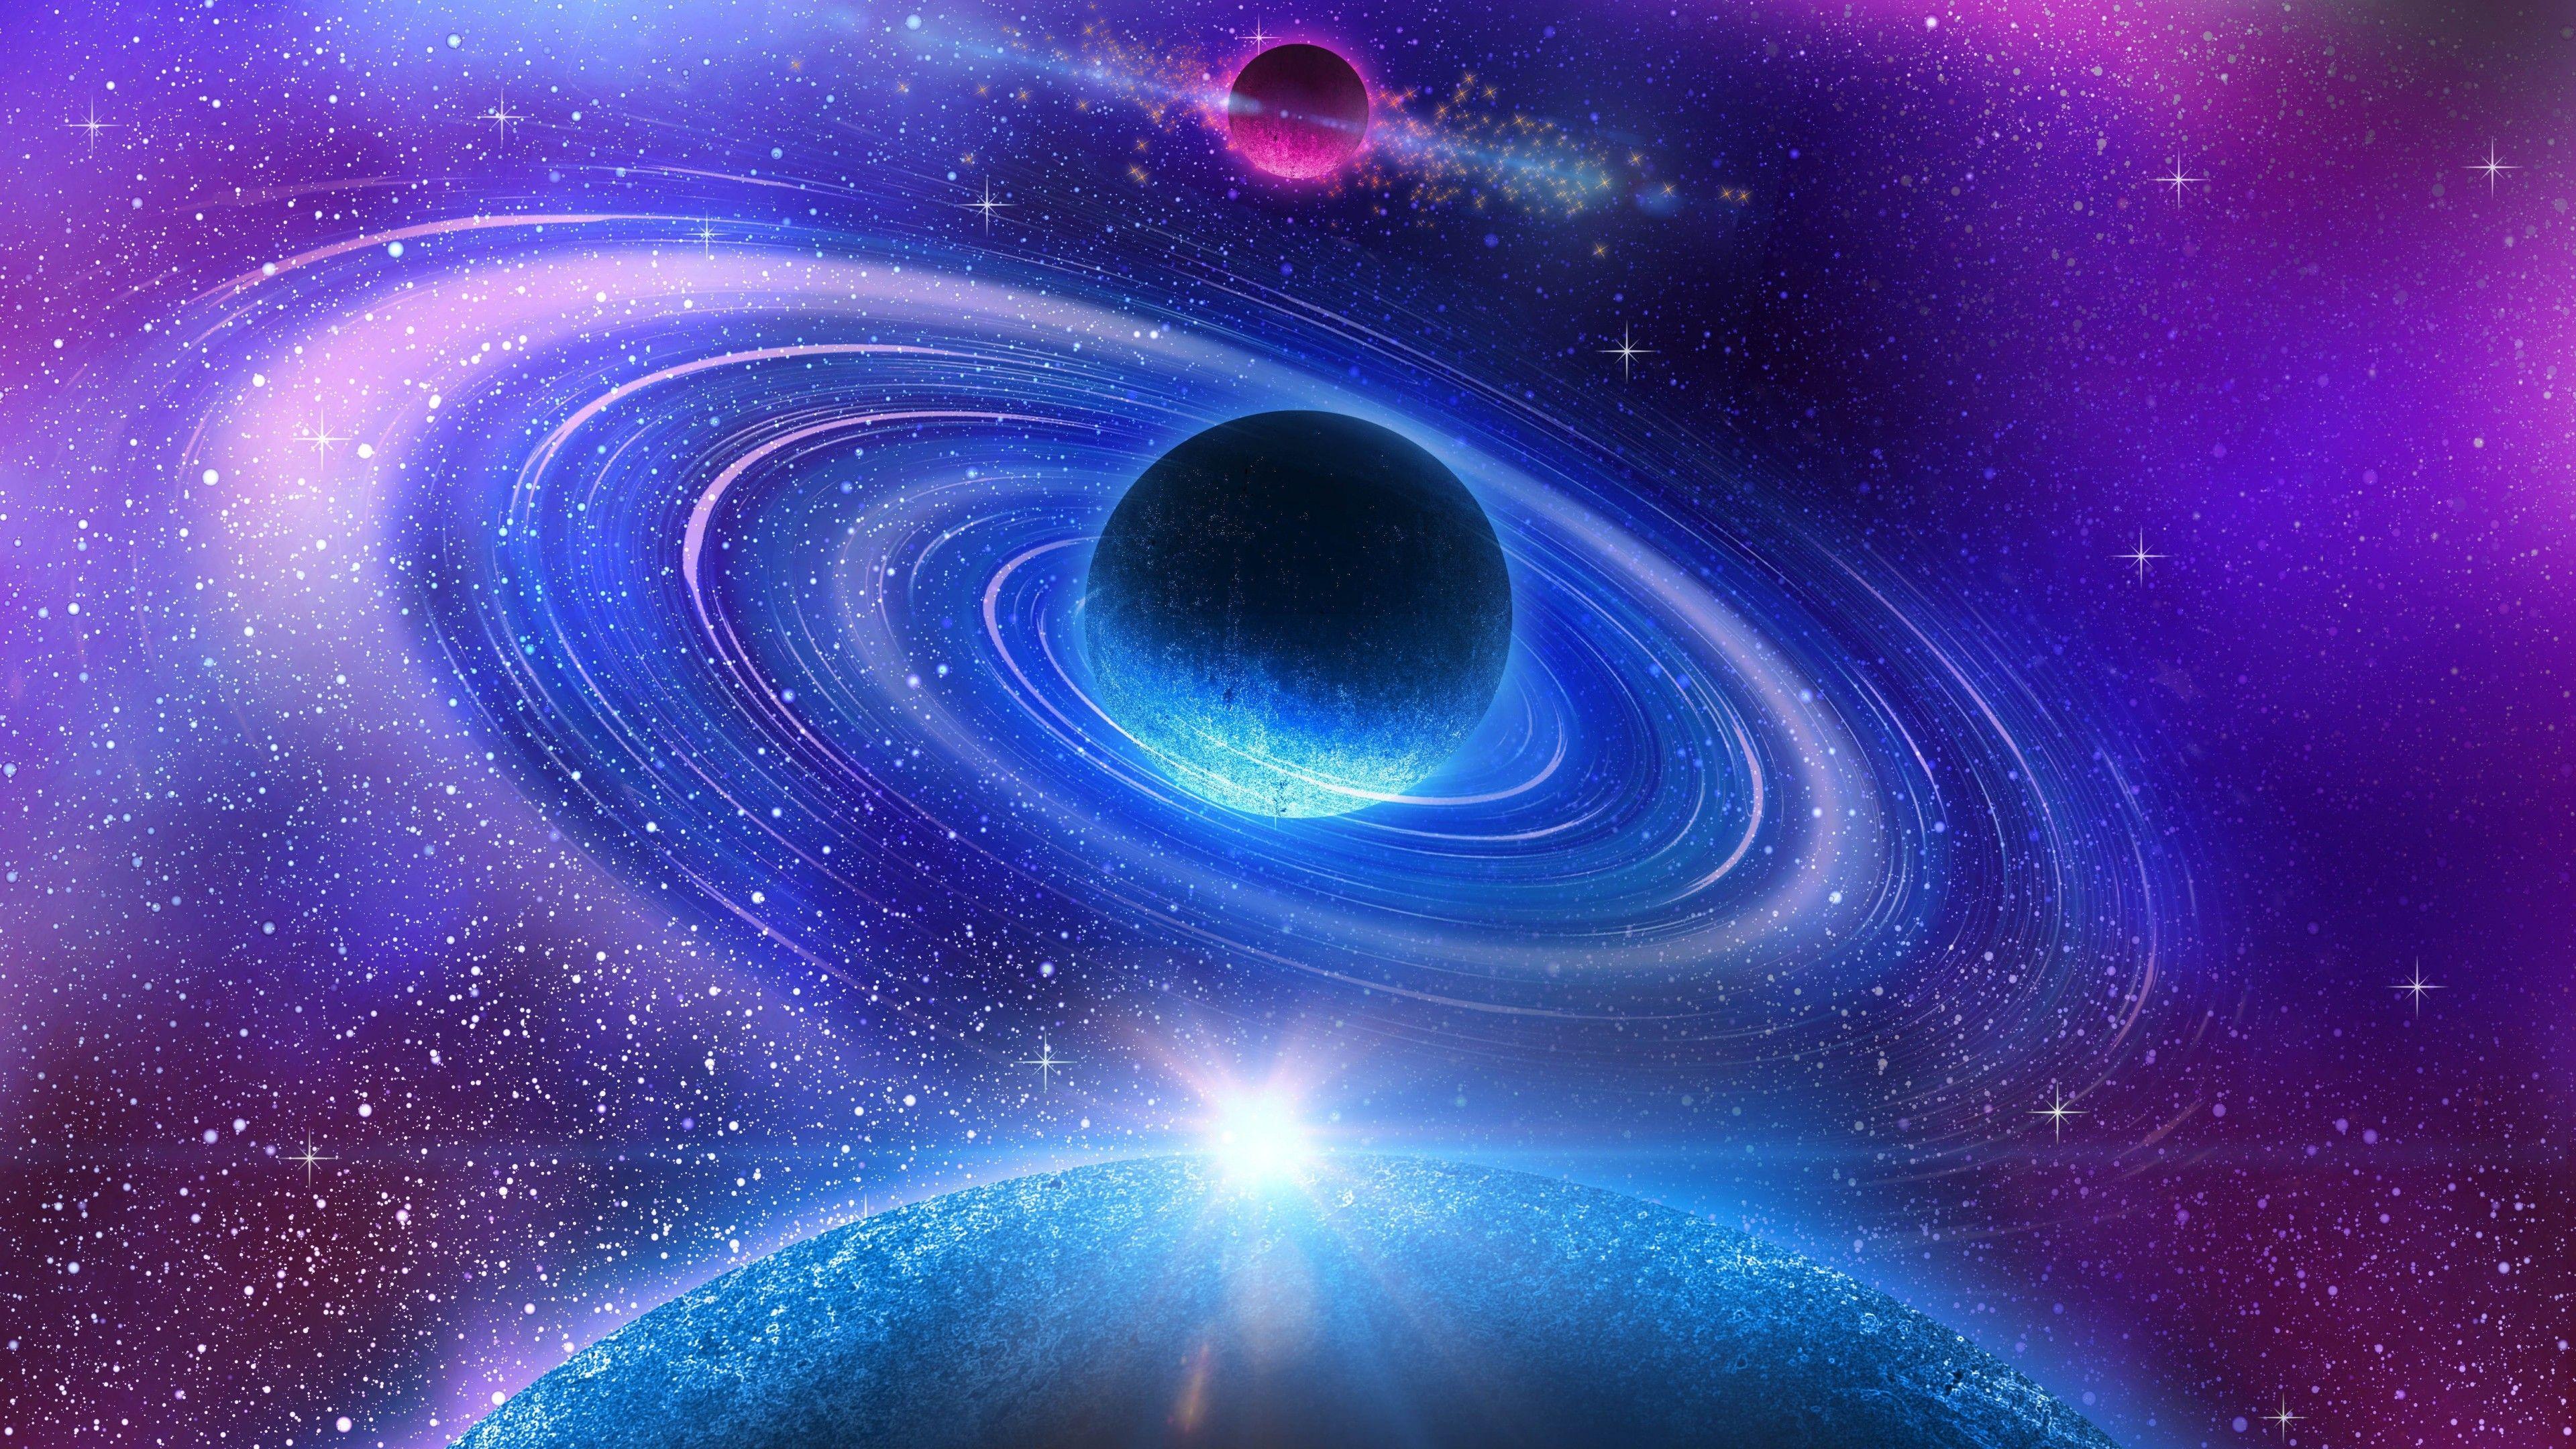 3840 x 2160 · jpeg - Trippy Space Wallpaper 3840x2160 for ios | Cool galaxy wallpapers ...